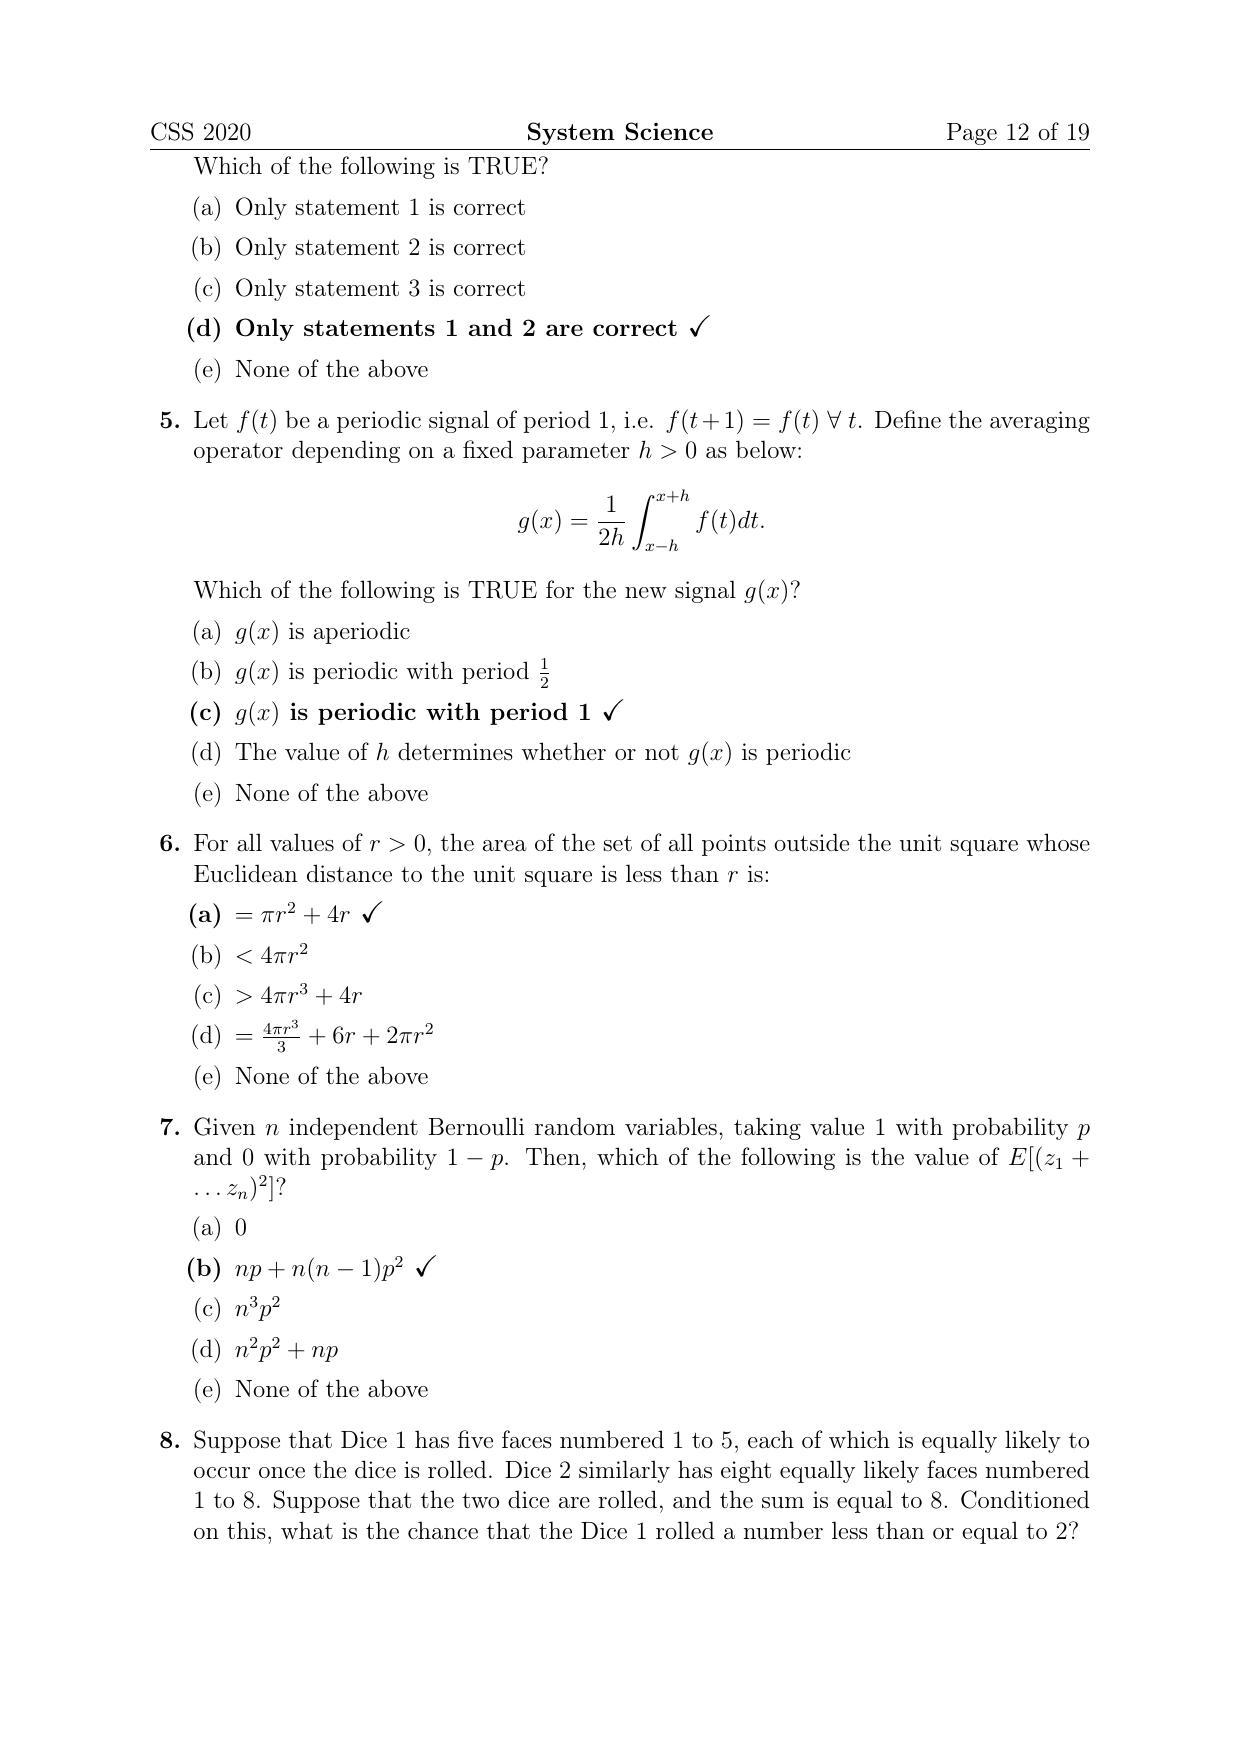 TIFR GS 2020 Computer & Systems Sciences Question Paper - Page 12